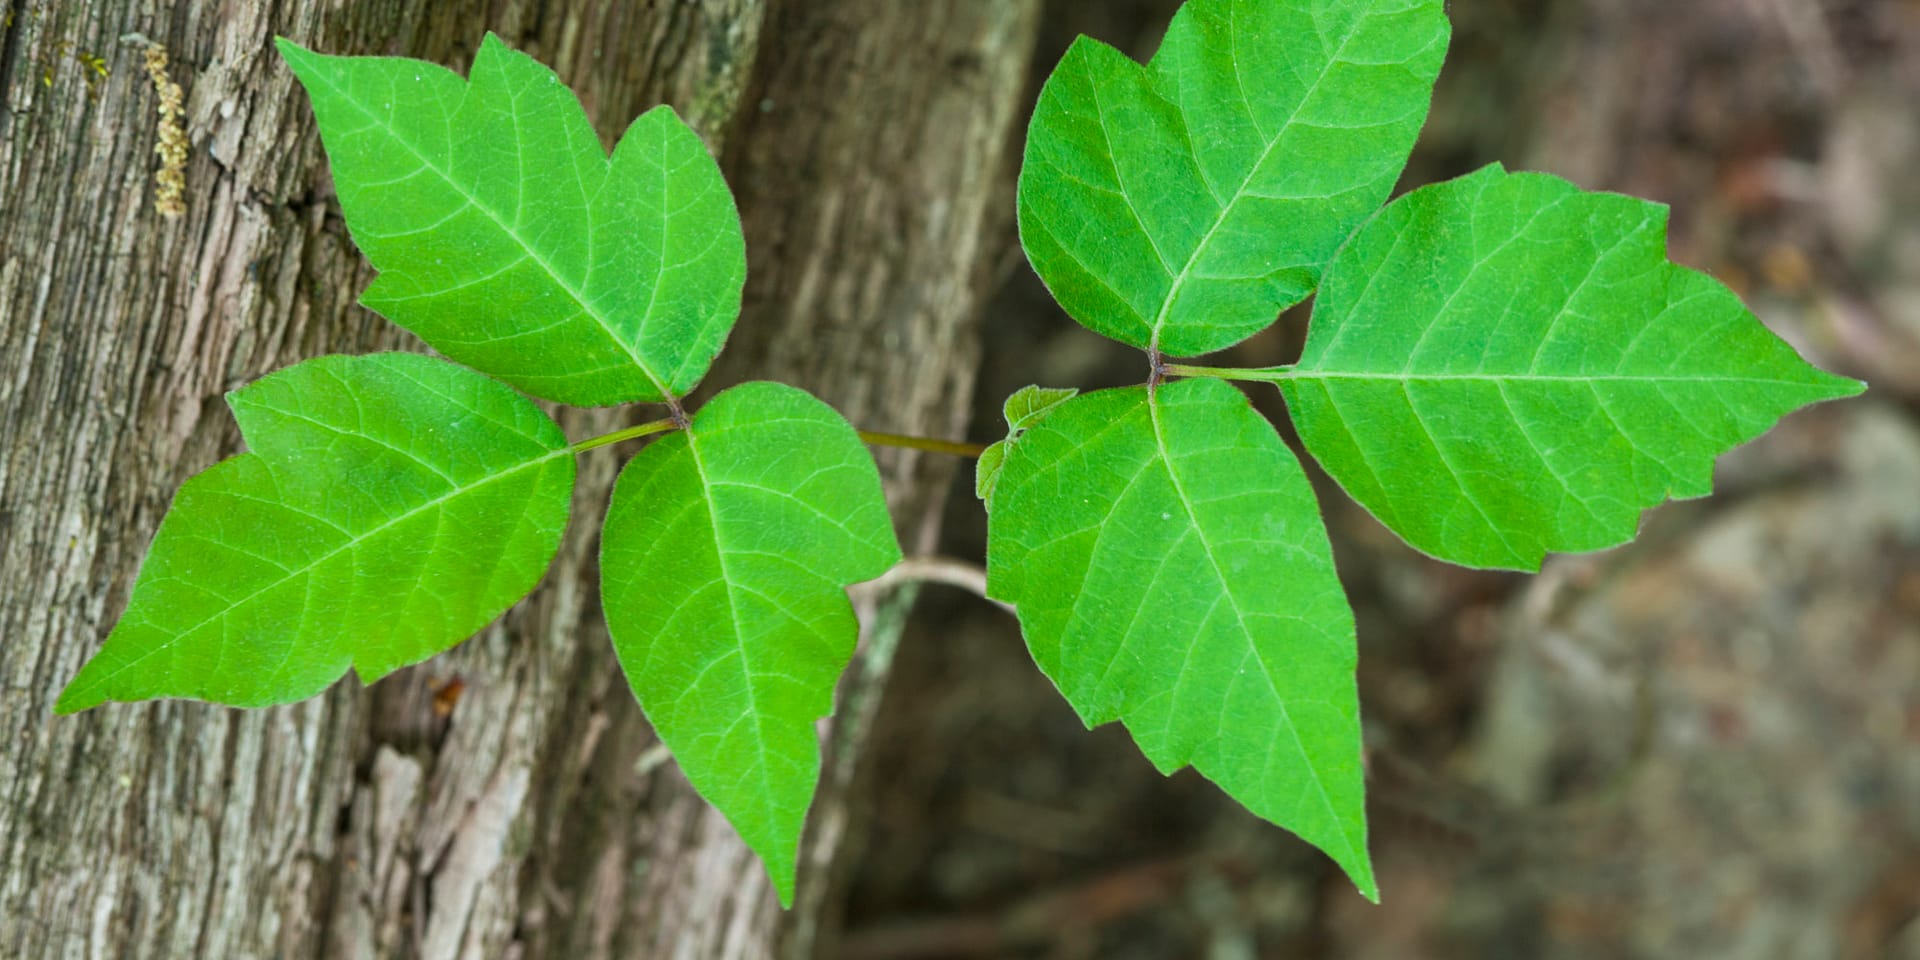 Poison Ivy – What Are The Best Ways To Kill?